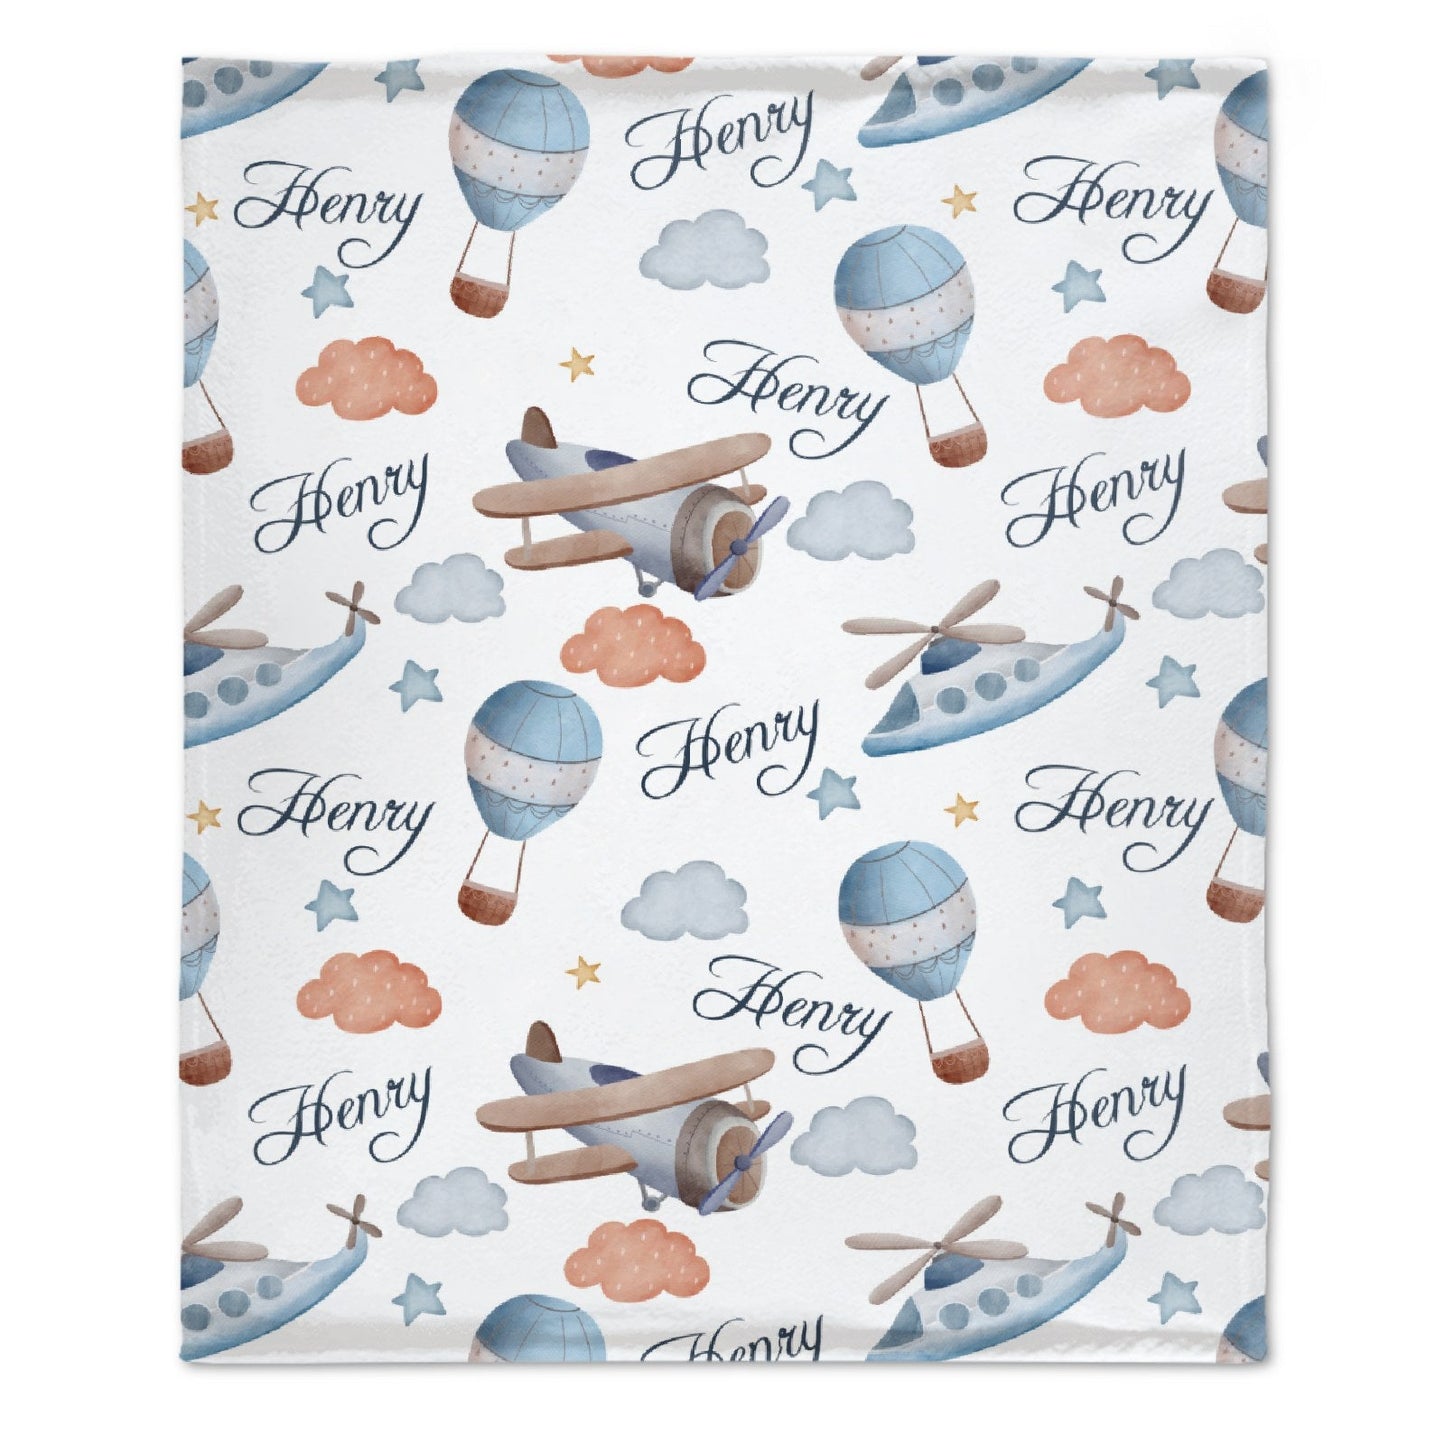 ️Personalized Hot Air Balloon Plane Baby Blanket